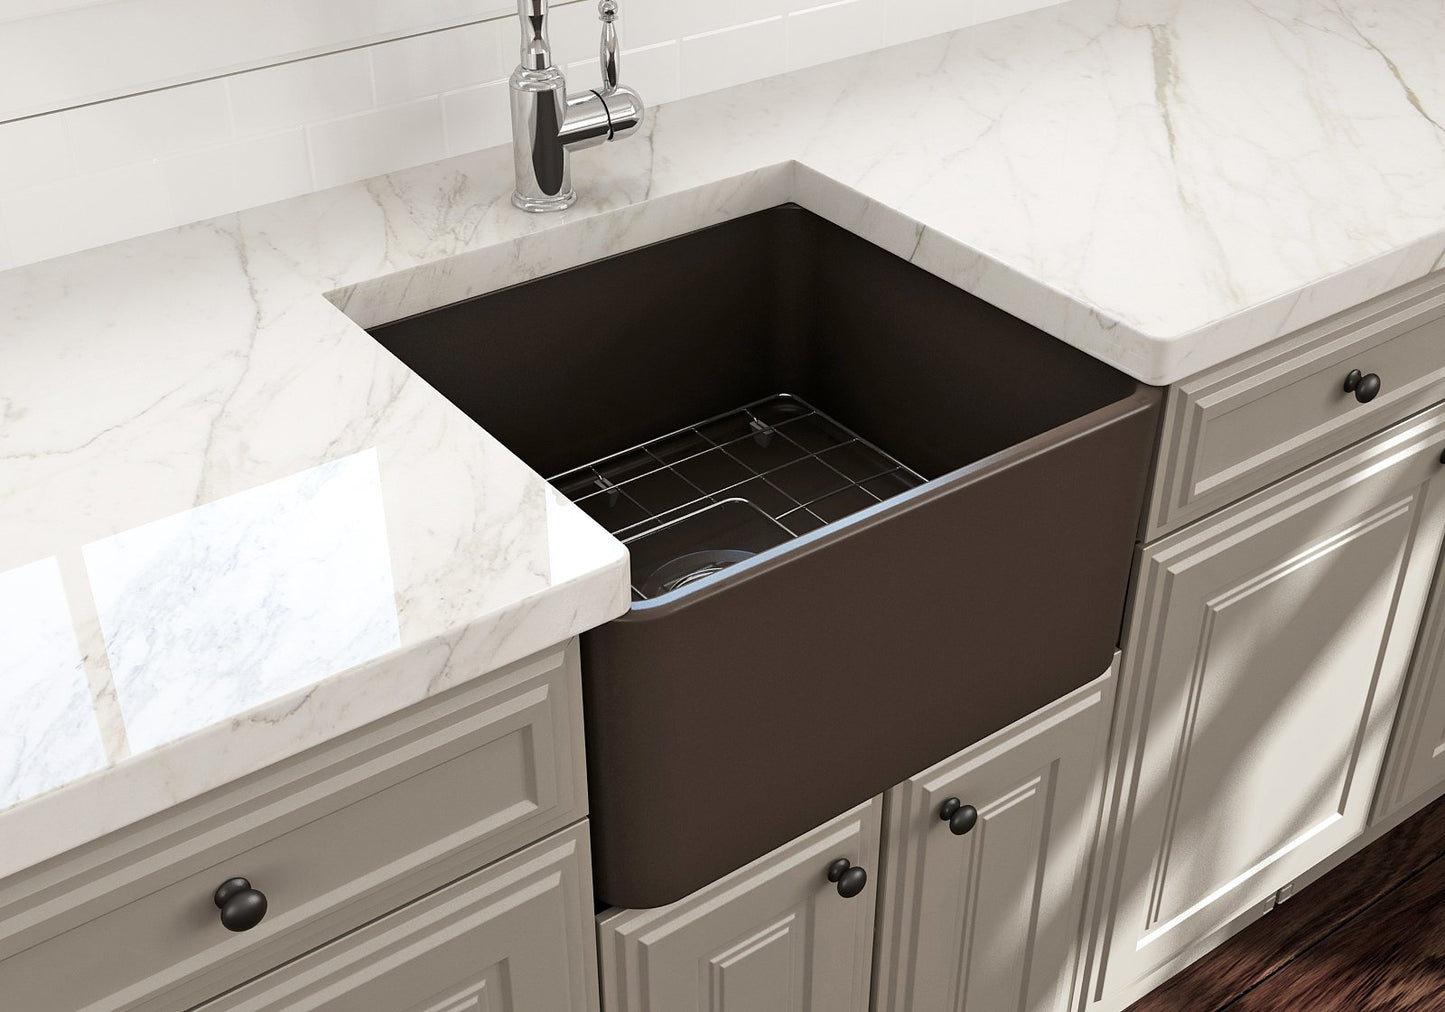 Bocchi Farmhouse Apron Front Fireclay 20" Single Bowl Kitchen Sink (Call for special pricing)